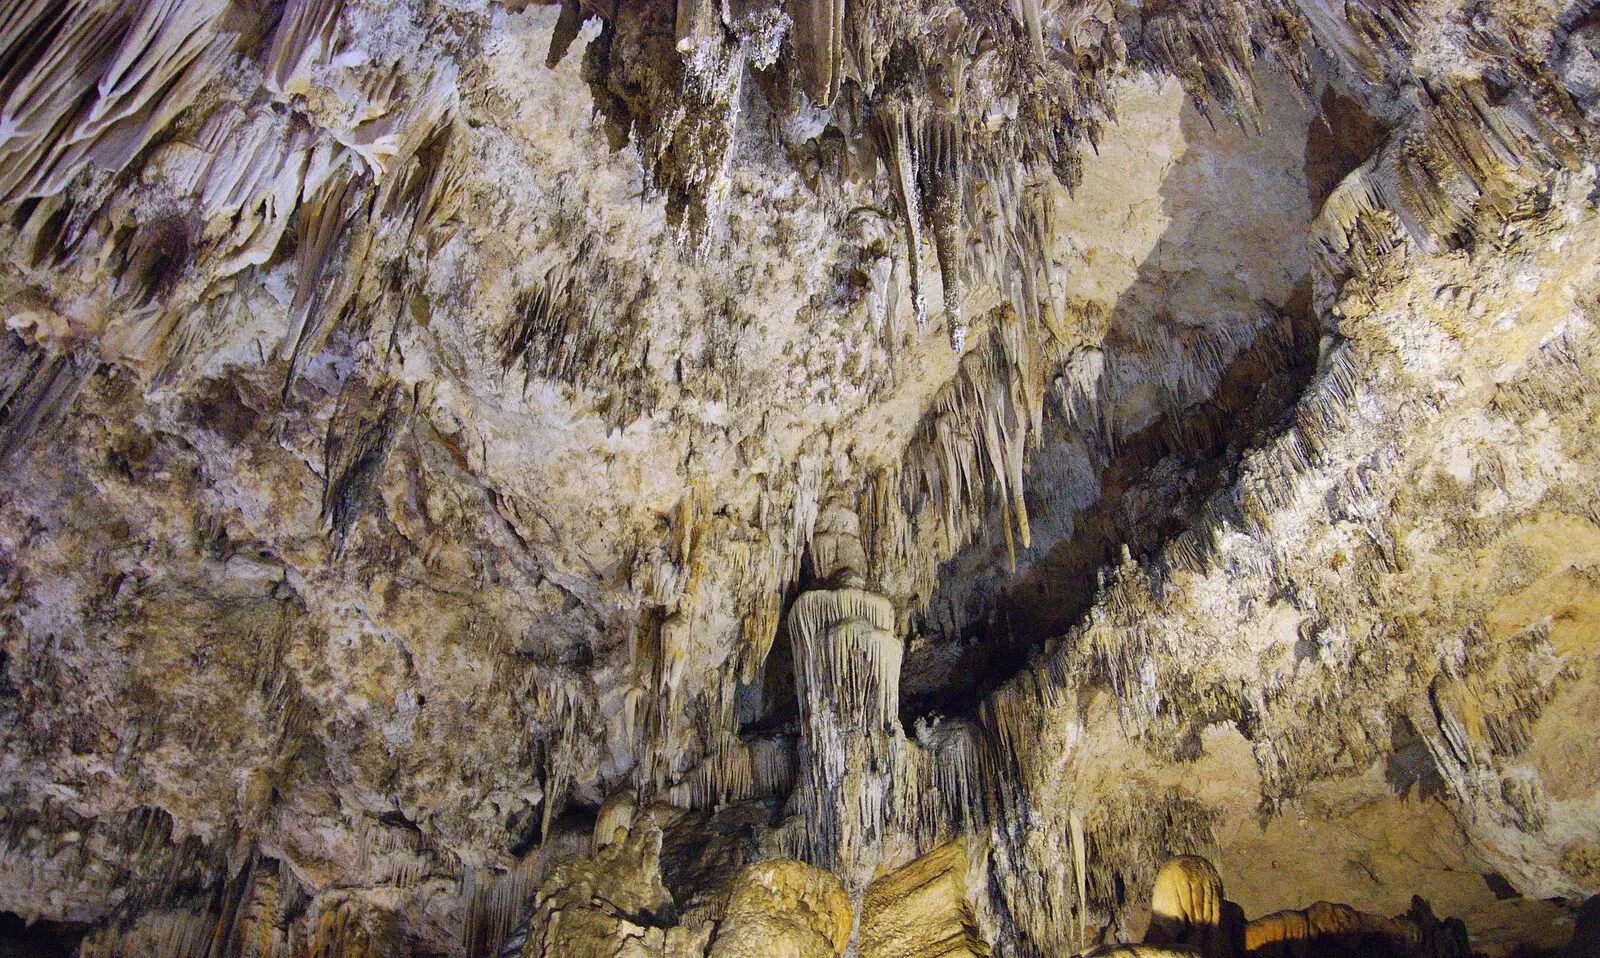 Another part of the cave, from The Caves of Nerja, and Frigiliana, Andalusia, Spain - 18th April 2019